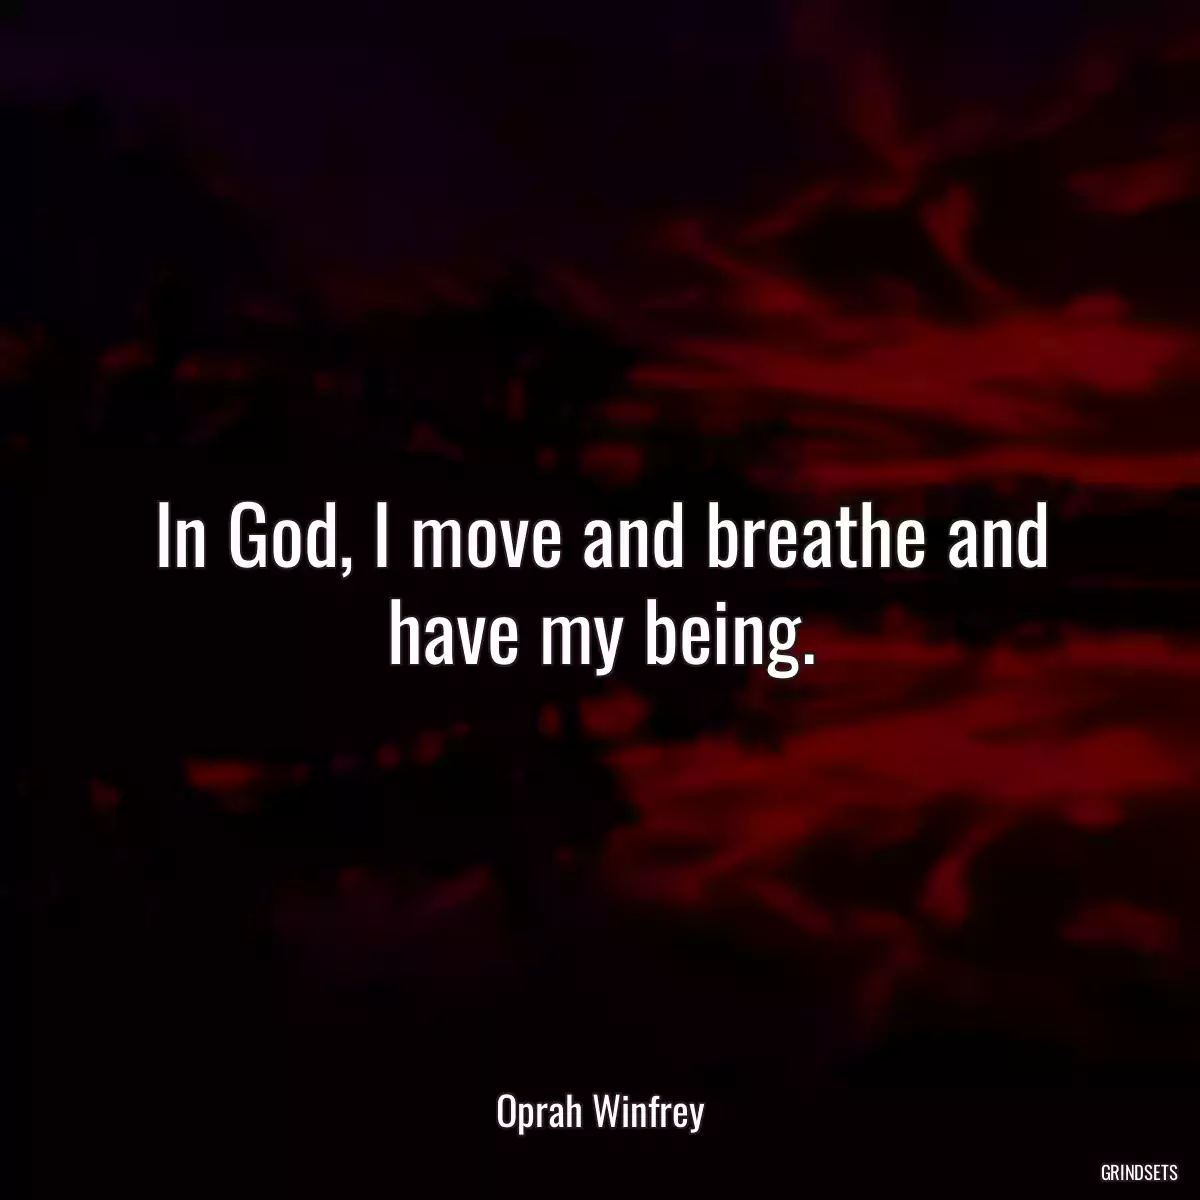 In God, I move and breathe and have my being.